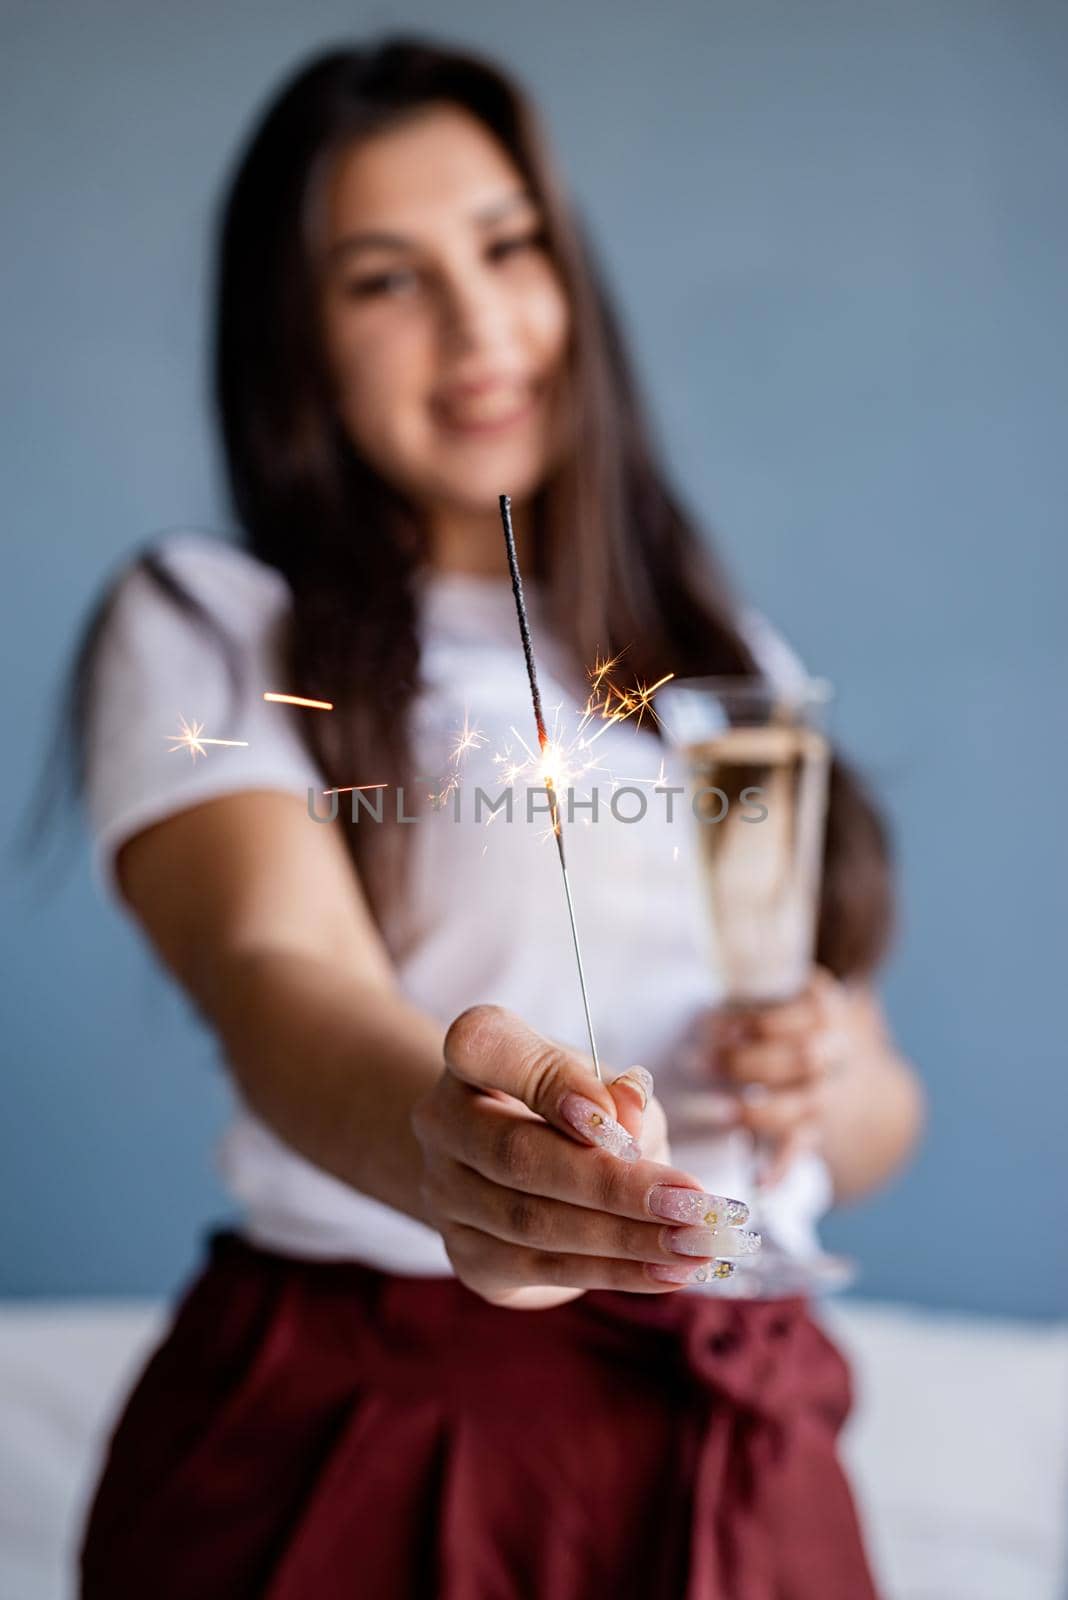 Valentines Day. Young brunette woman drinking champagne holding a sparkler